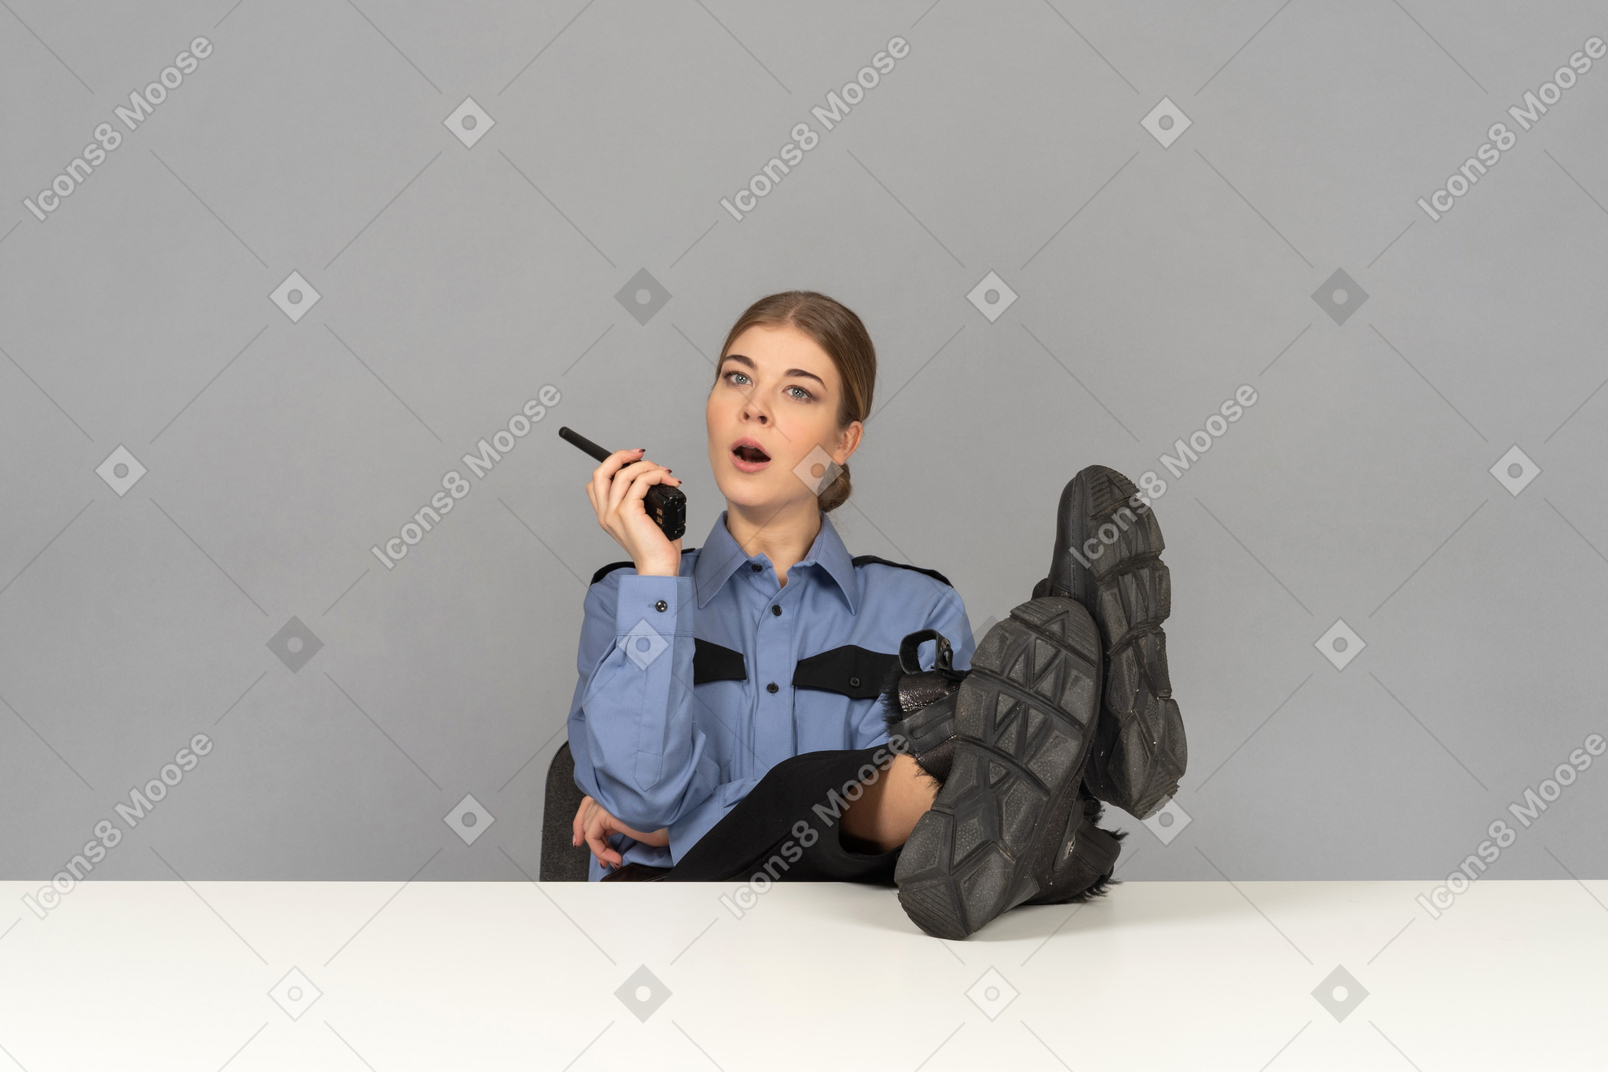 A female security guard sitting at her desk